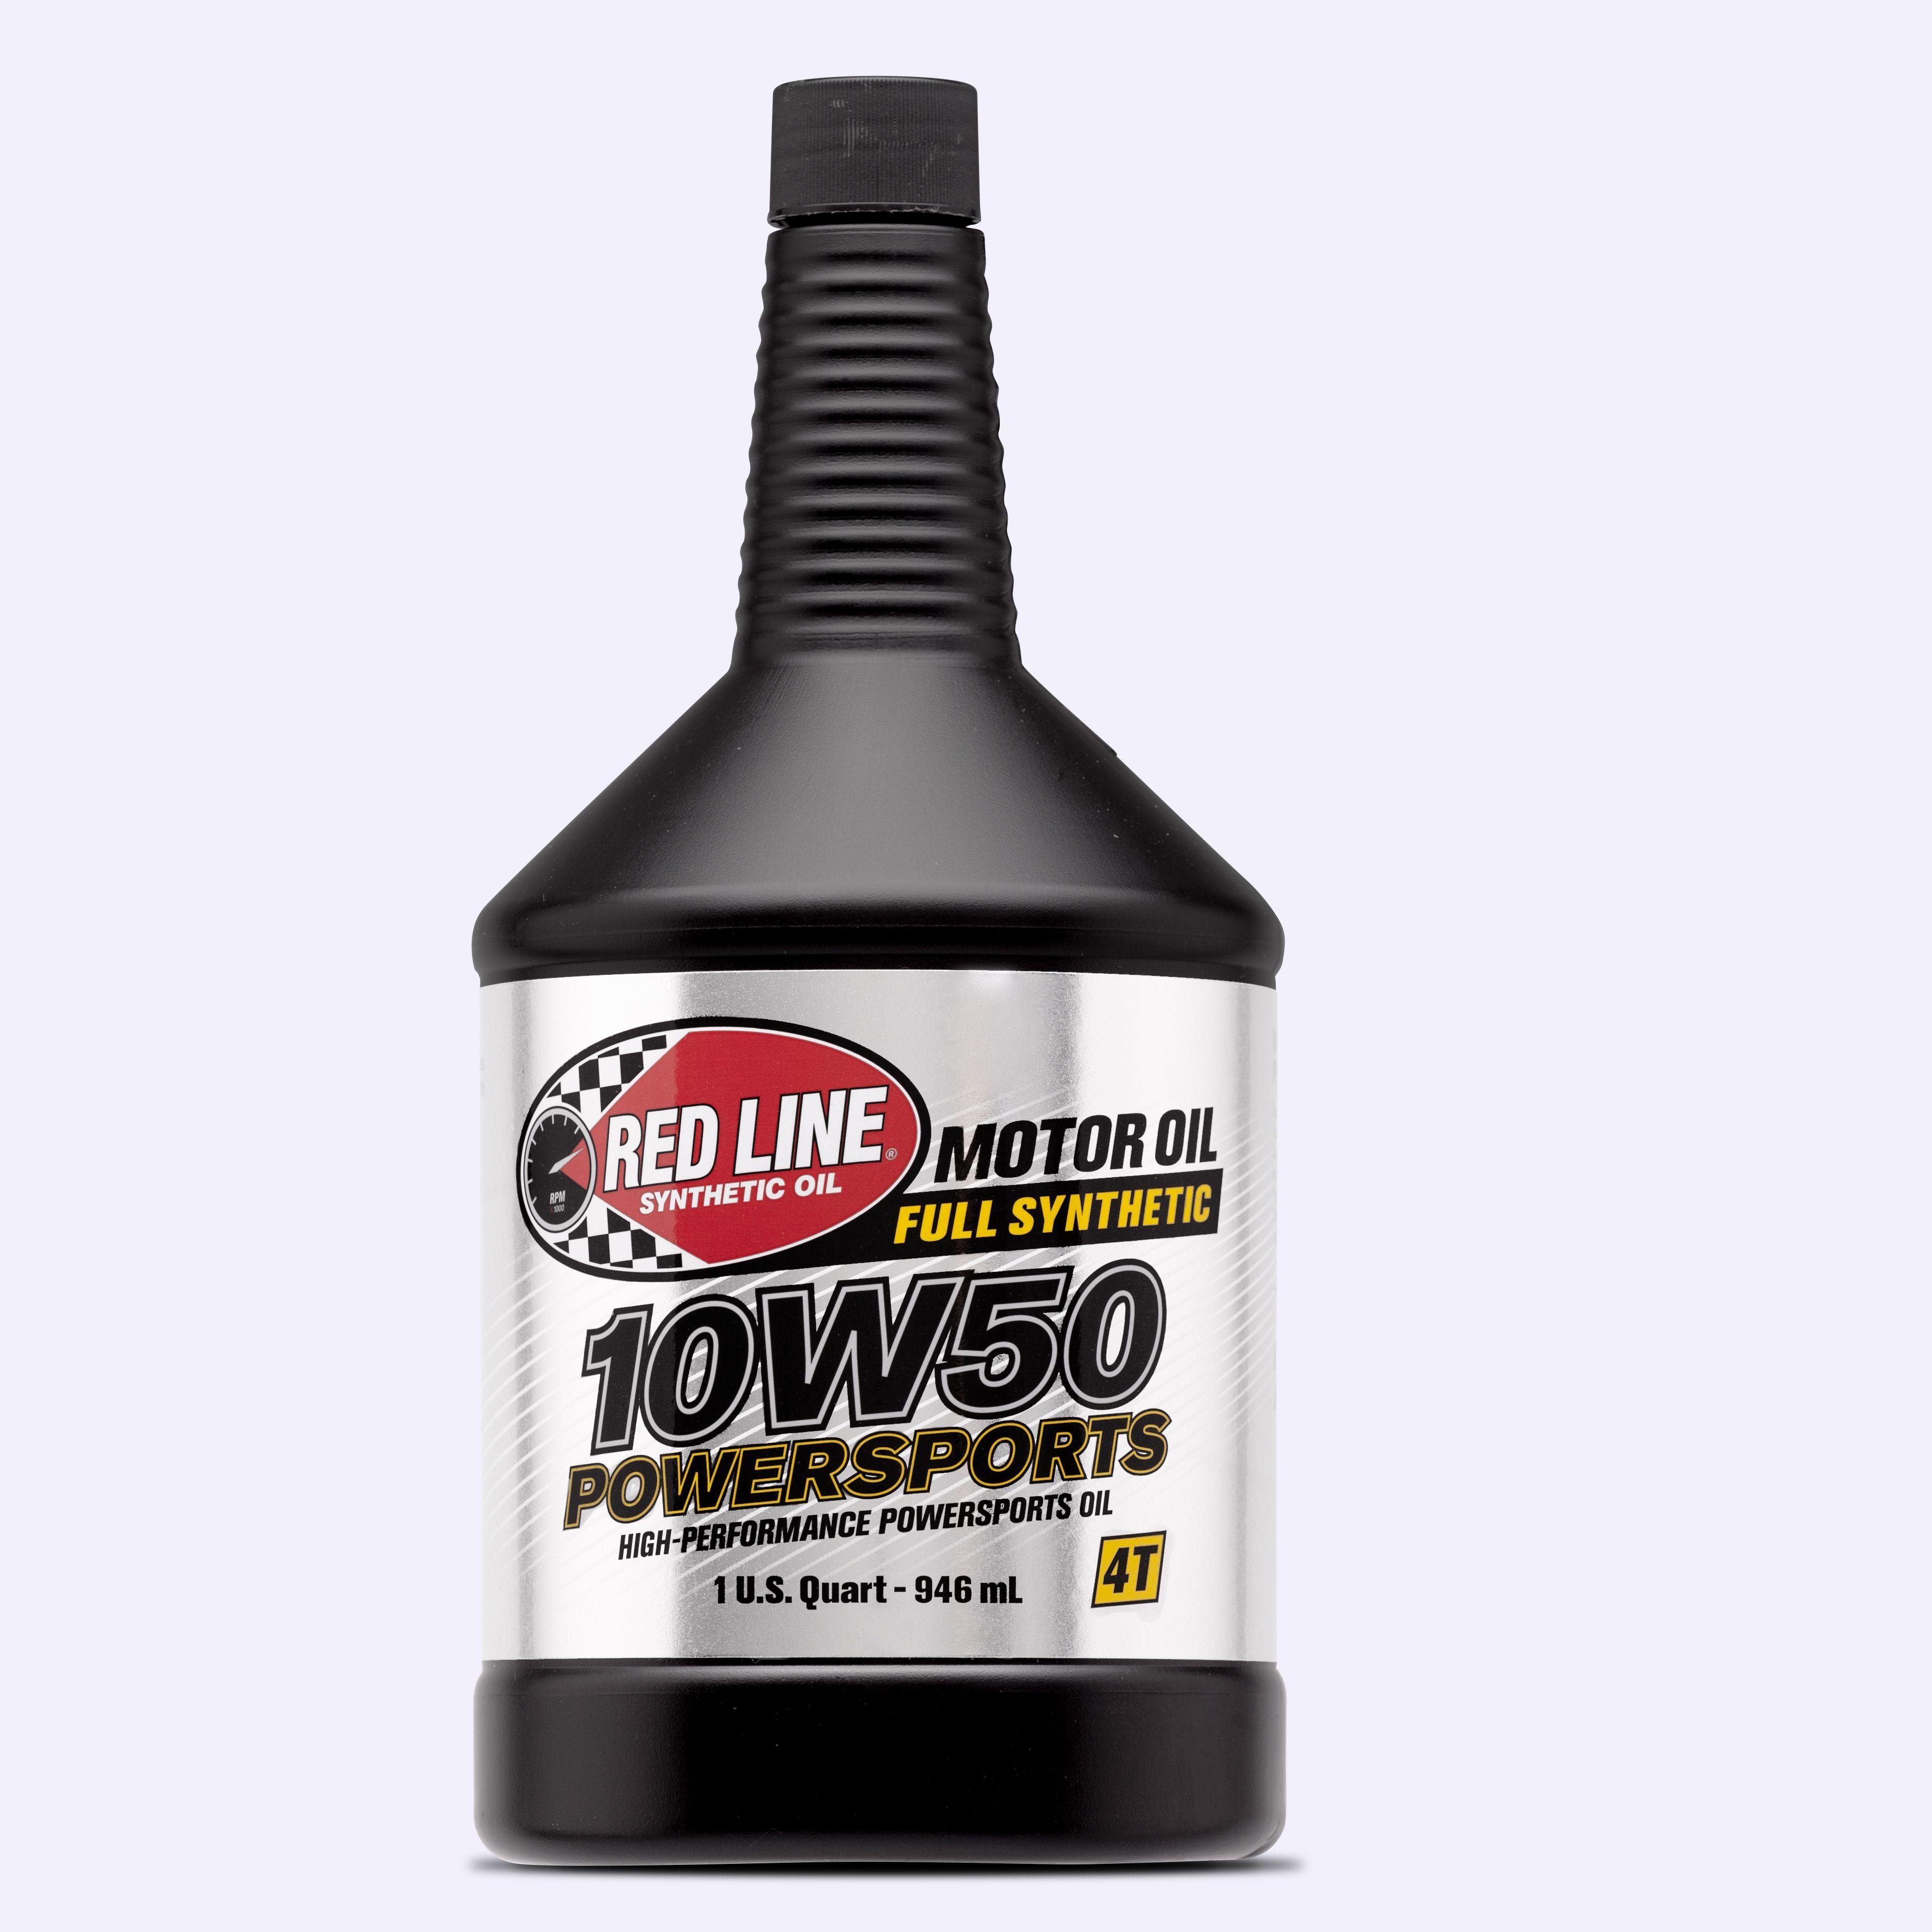 High Red Line Oil Logo - Red Line Synthetic Oil. Red Line Oil launches new Powersports